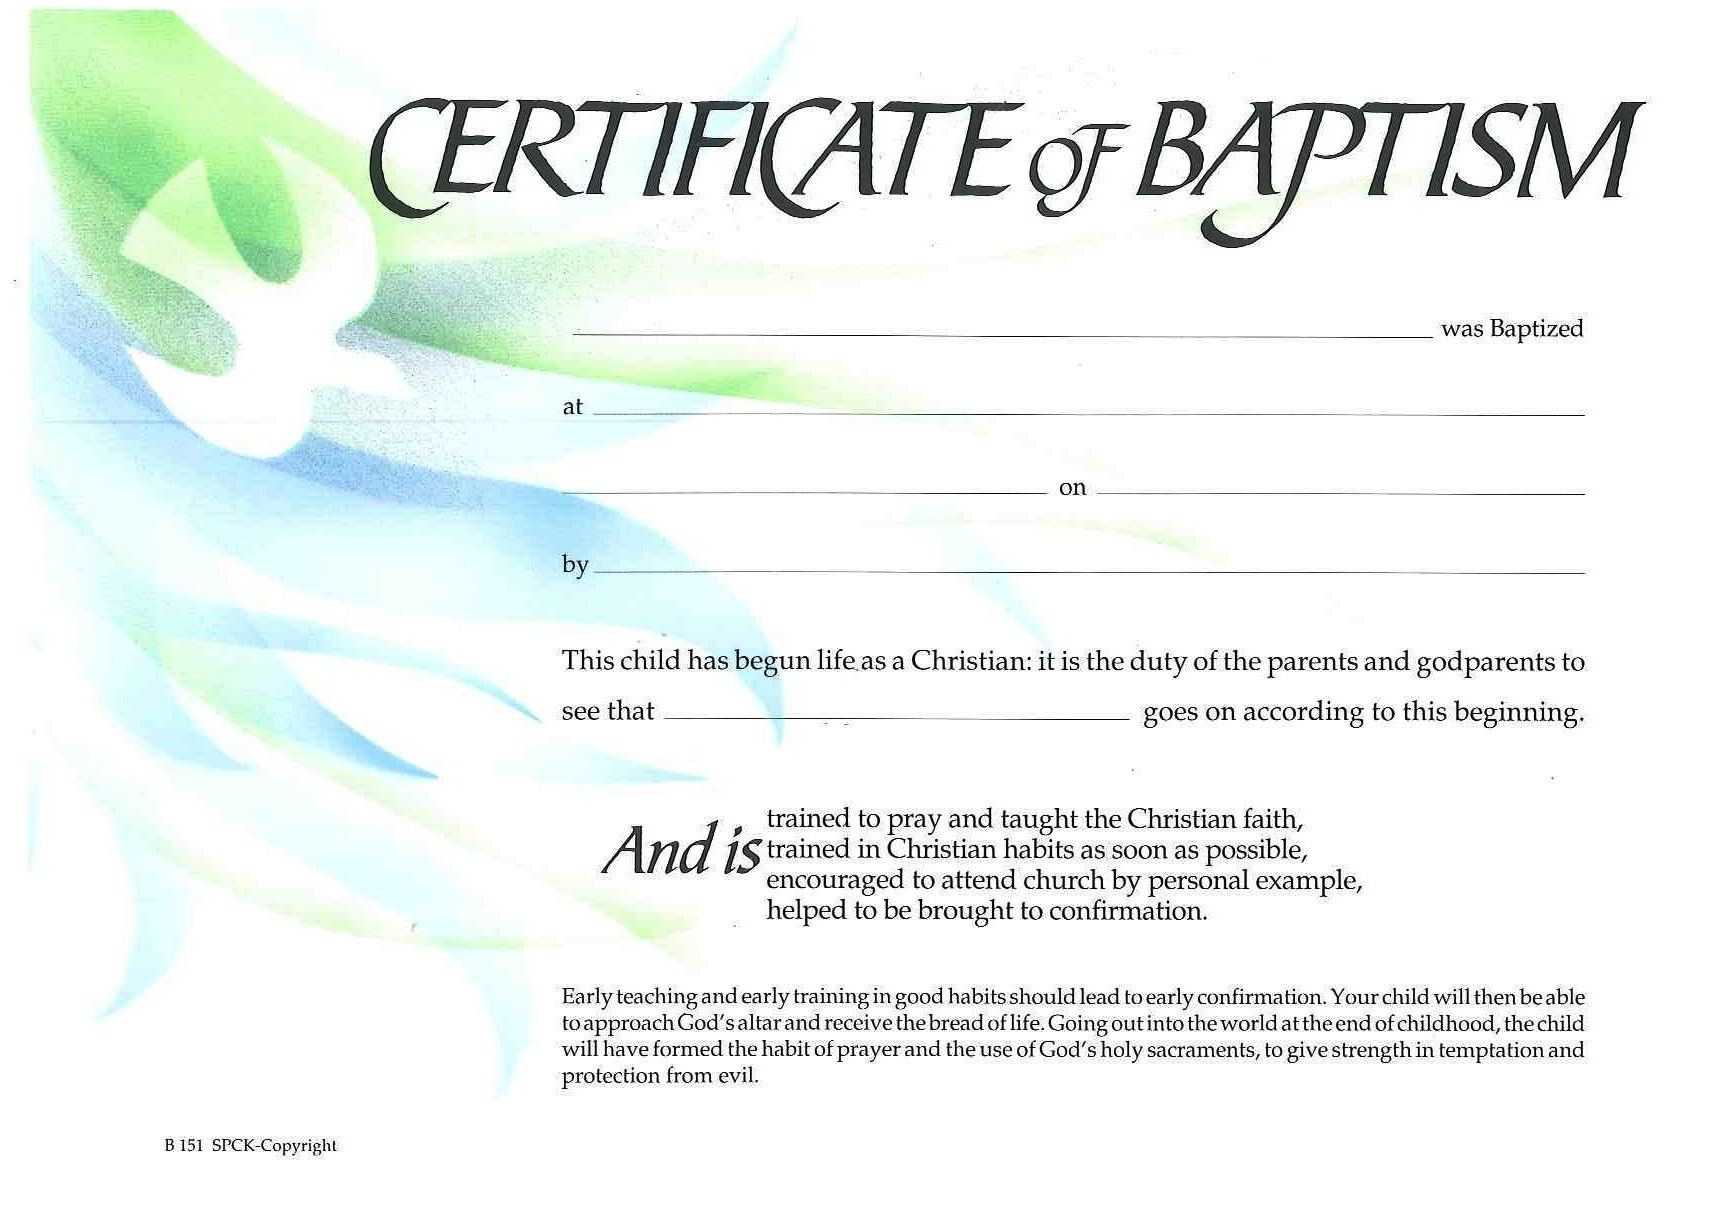 Baptism Certificate Xp4Eamuz | Certificate Templates, Baby With Roman Catholic Baptism Certificate Template